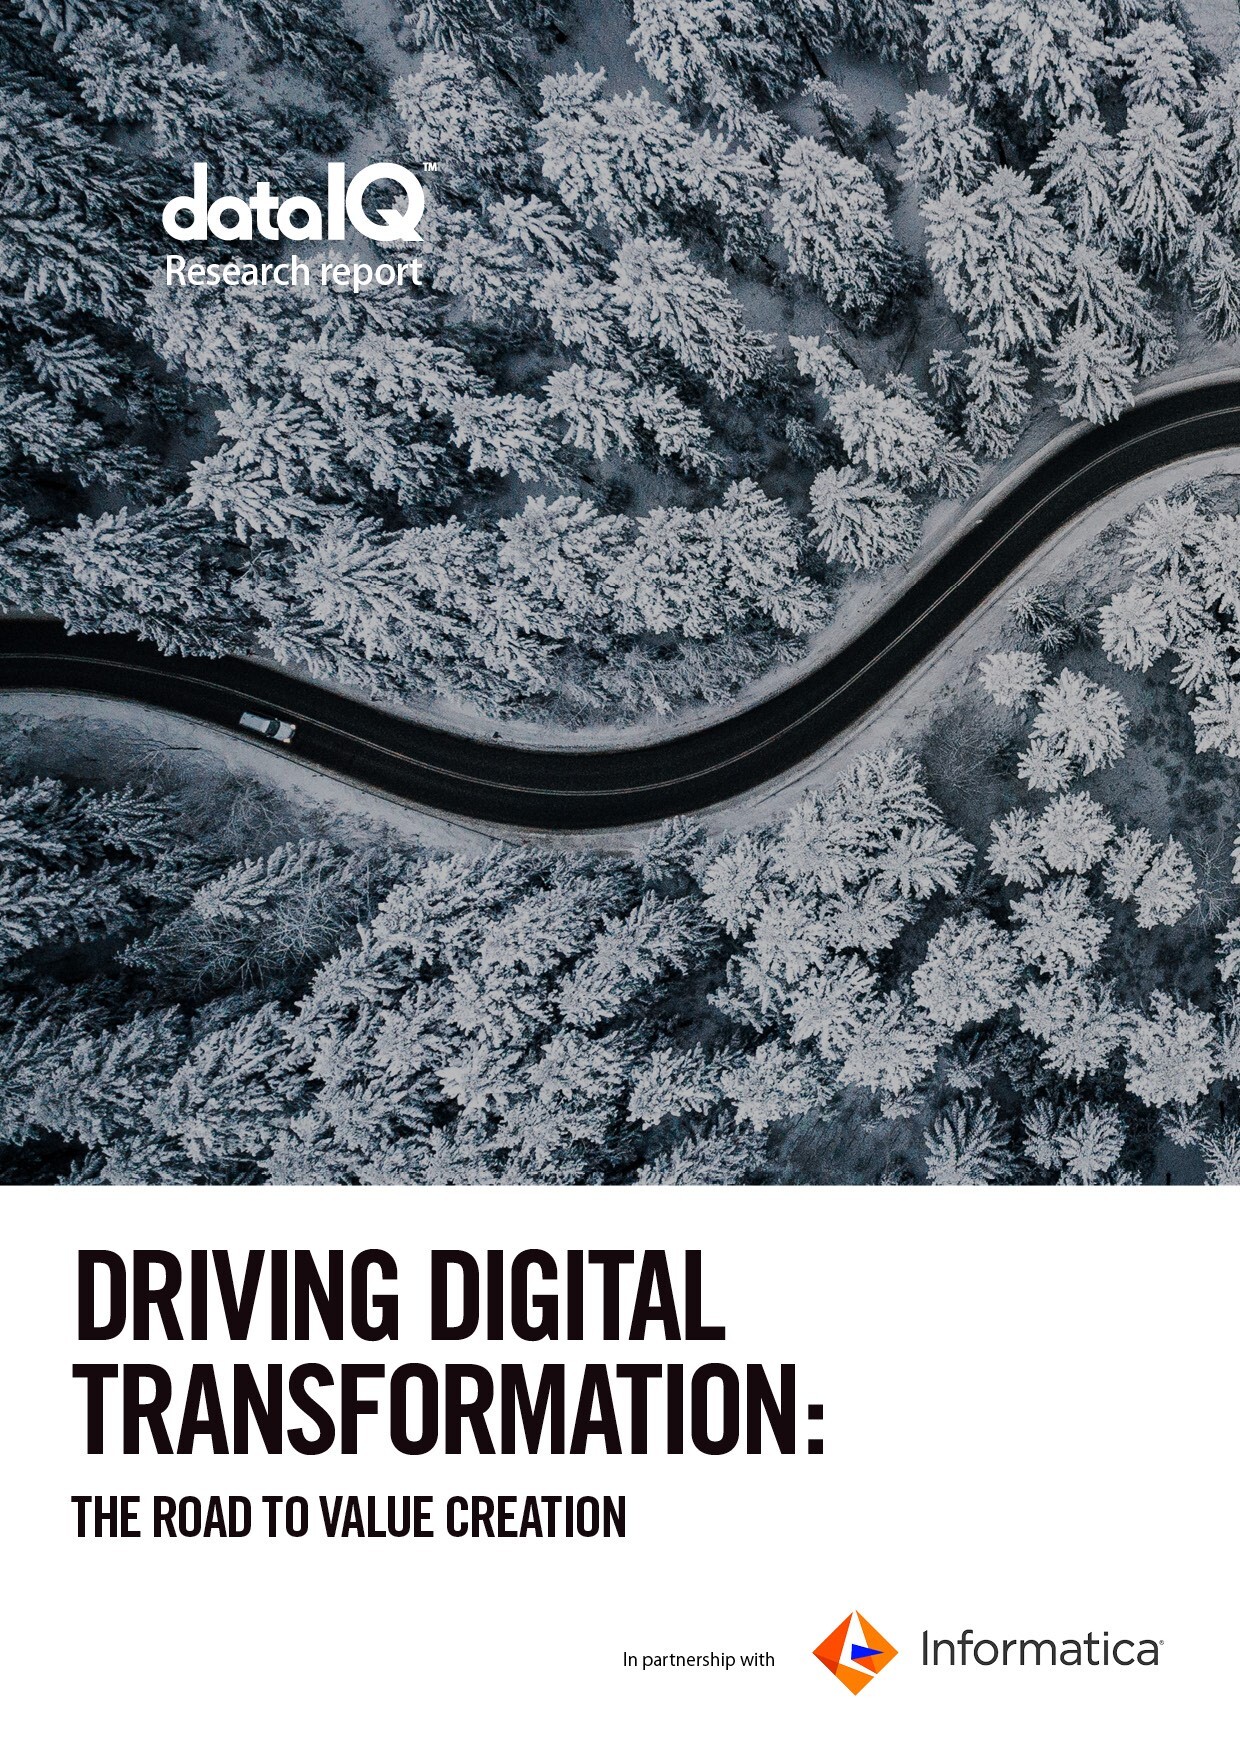 Driving digital transformation: The road to value creation